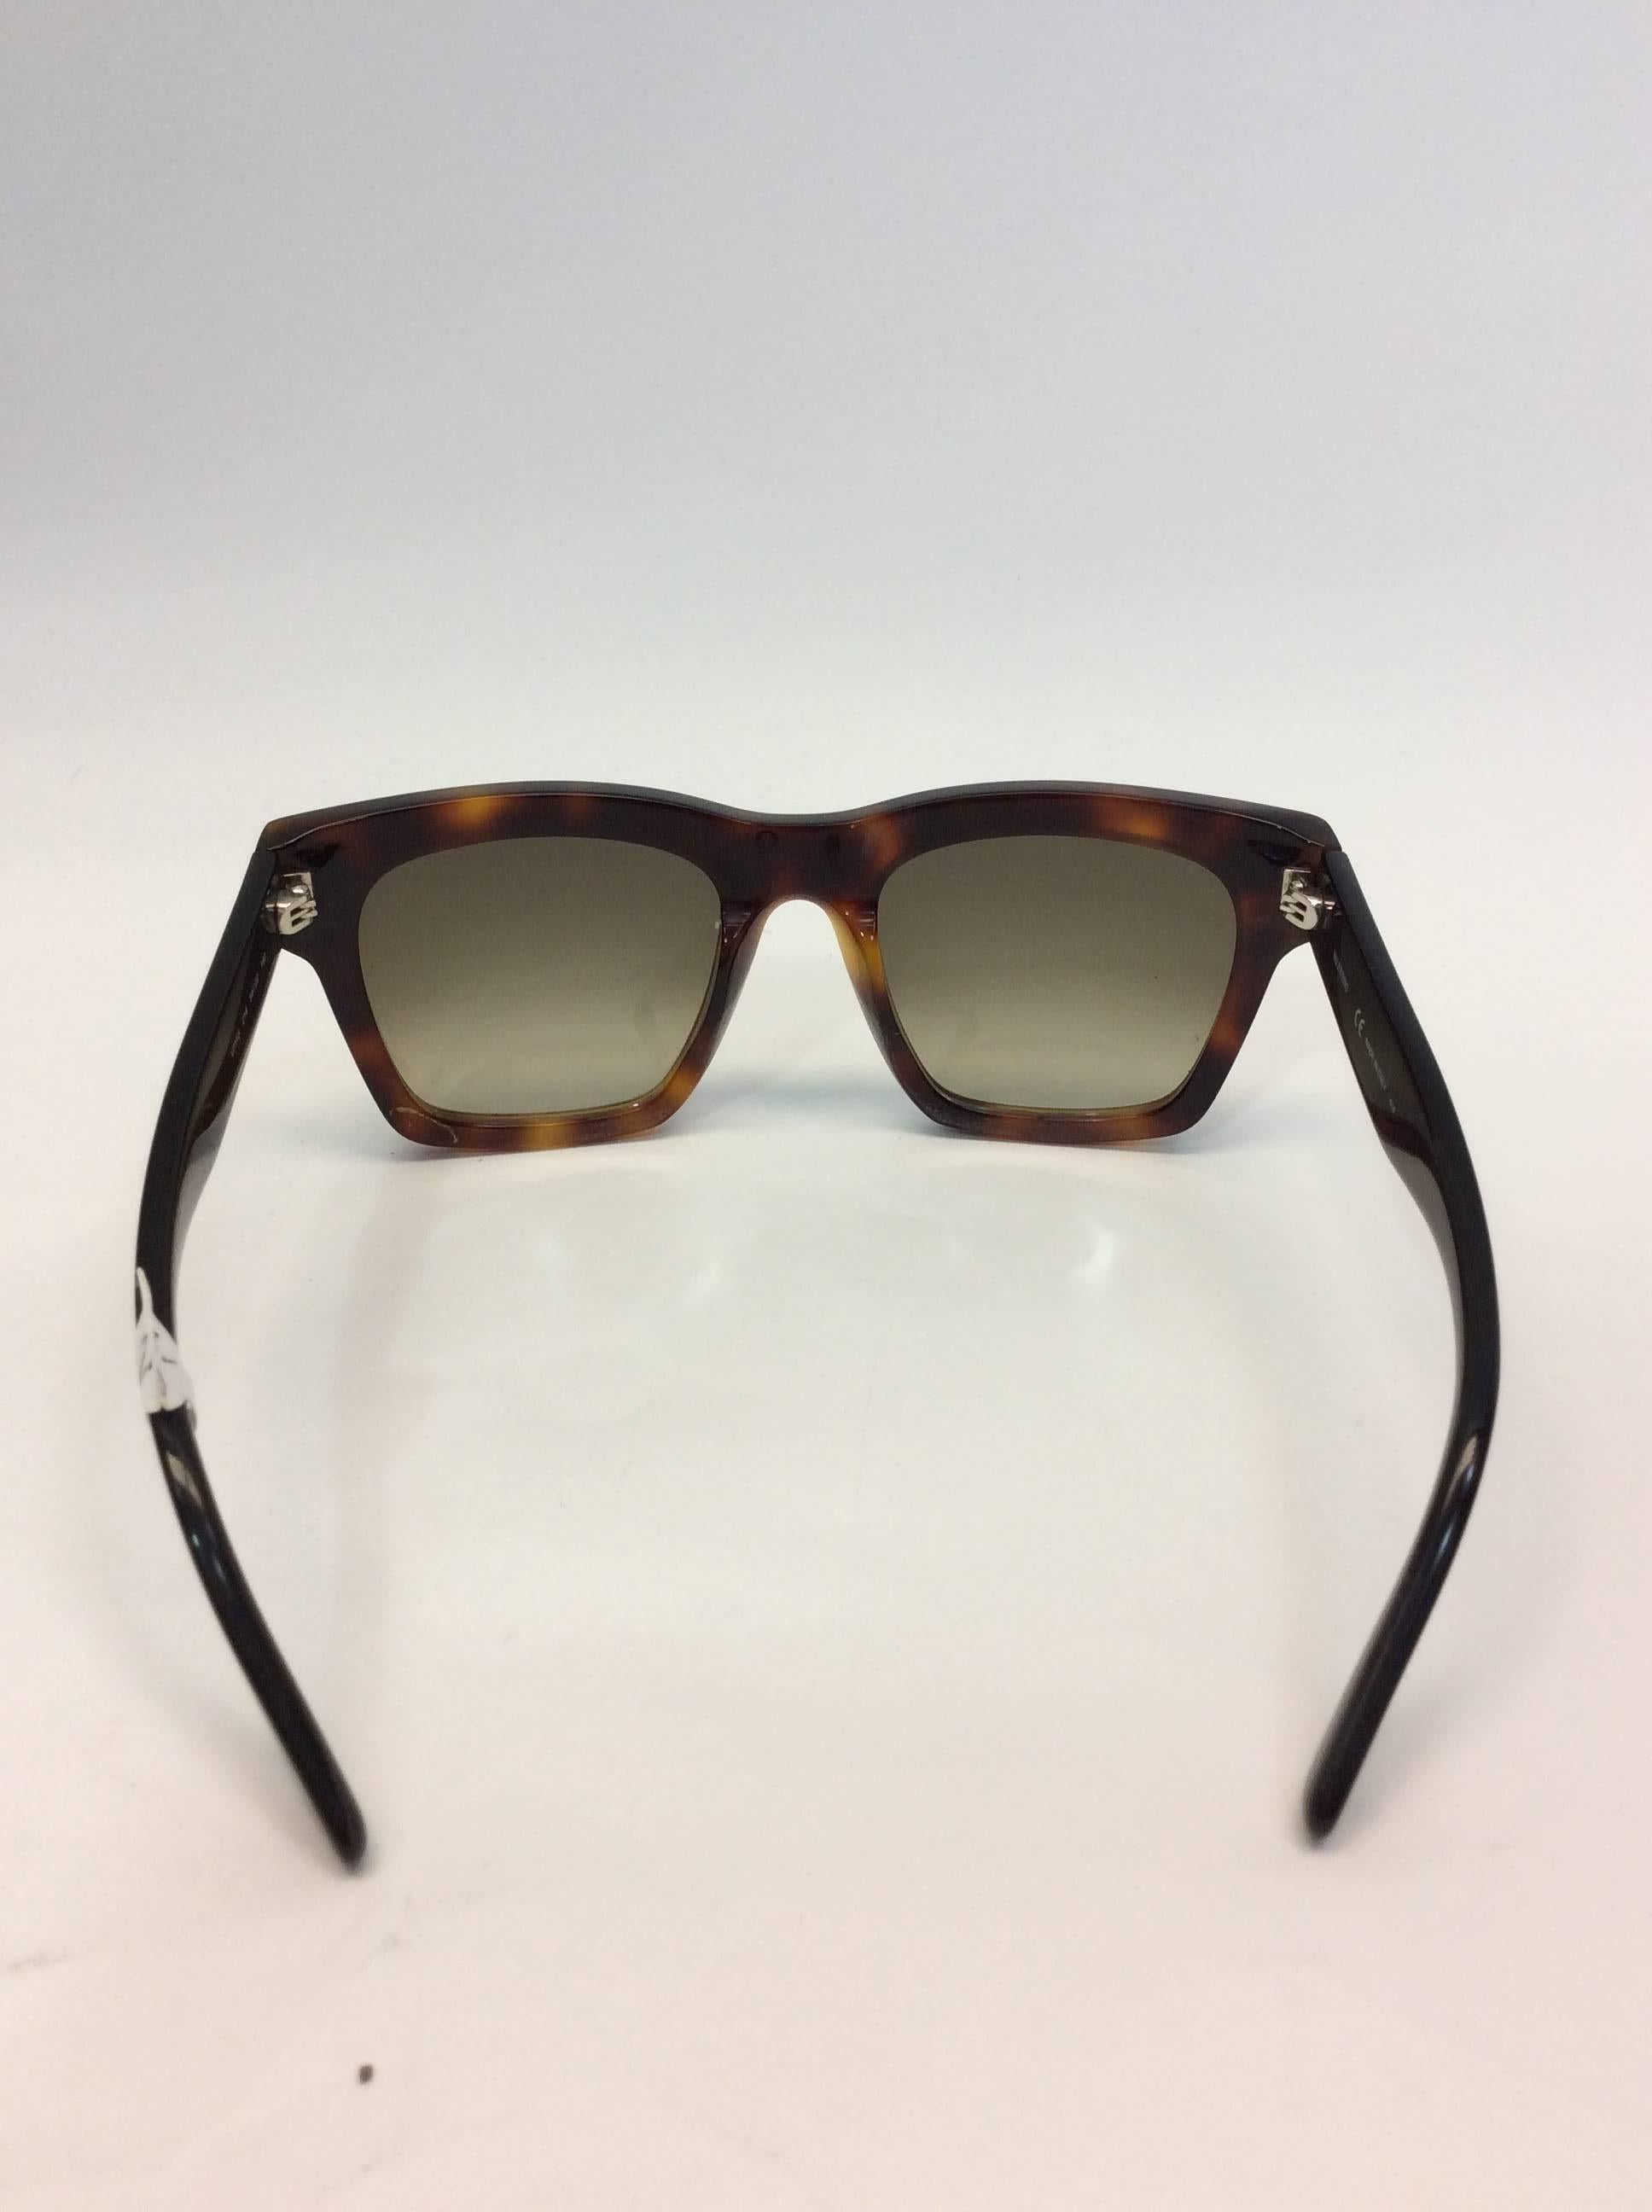 Valentino Tortoise Rockstud Square Sunglasses
Made in Italy
$225
Features Valentino's iconic rockstud integrated on the front frame
6.5 inches in length, 2.5 inches height
Comes with Valentino case
